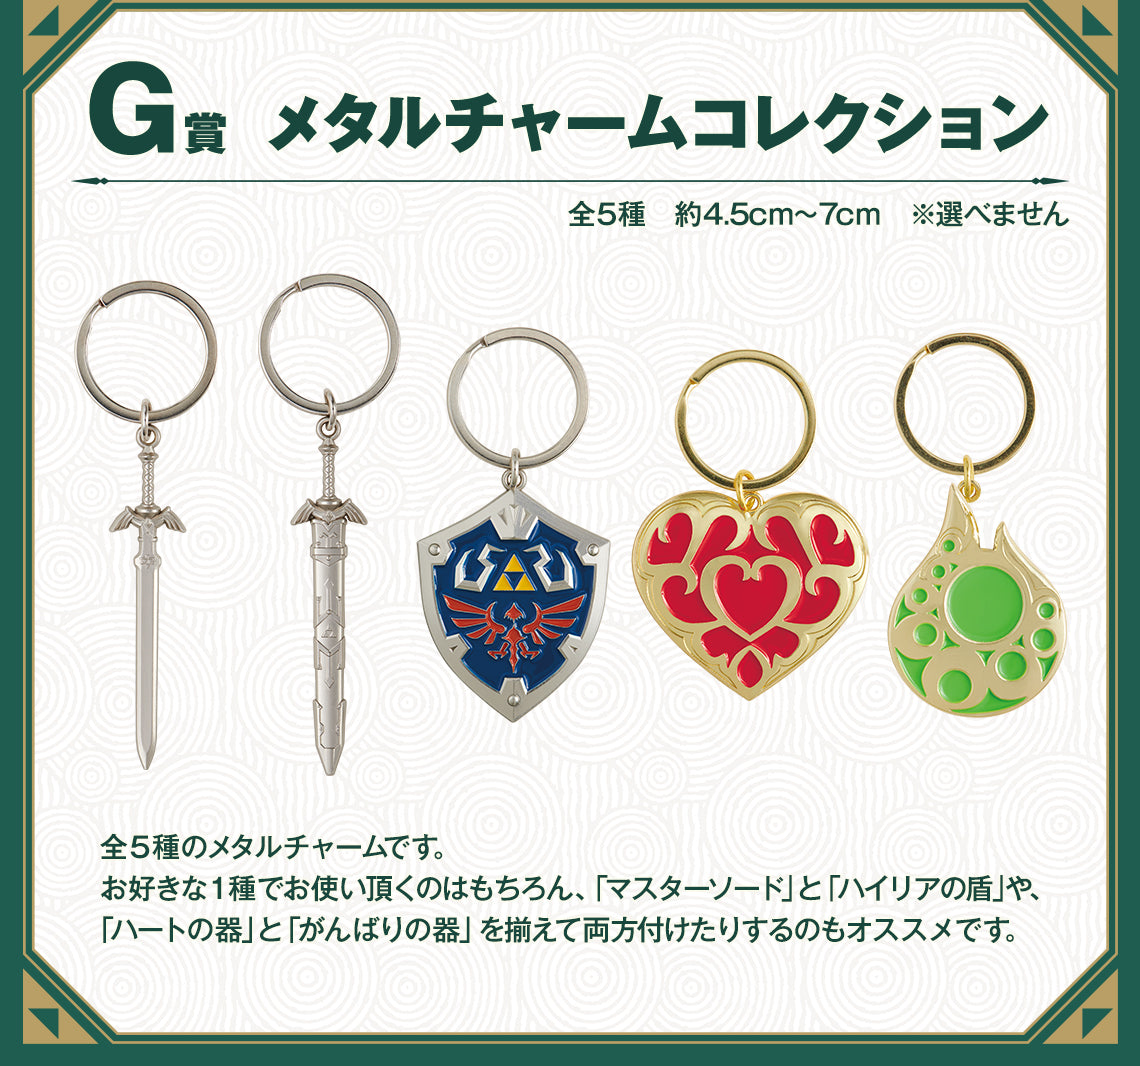 Ichiban Kuji The Legend of Zelda Tears of The Kingdom ~-Bandai-Ace Cards &amp; Collectibles